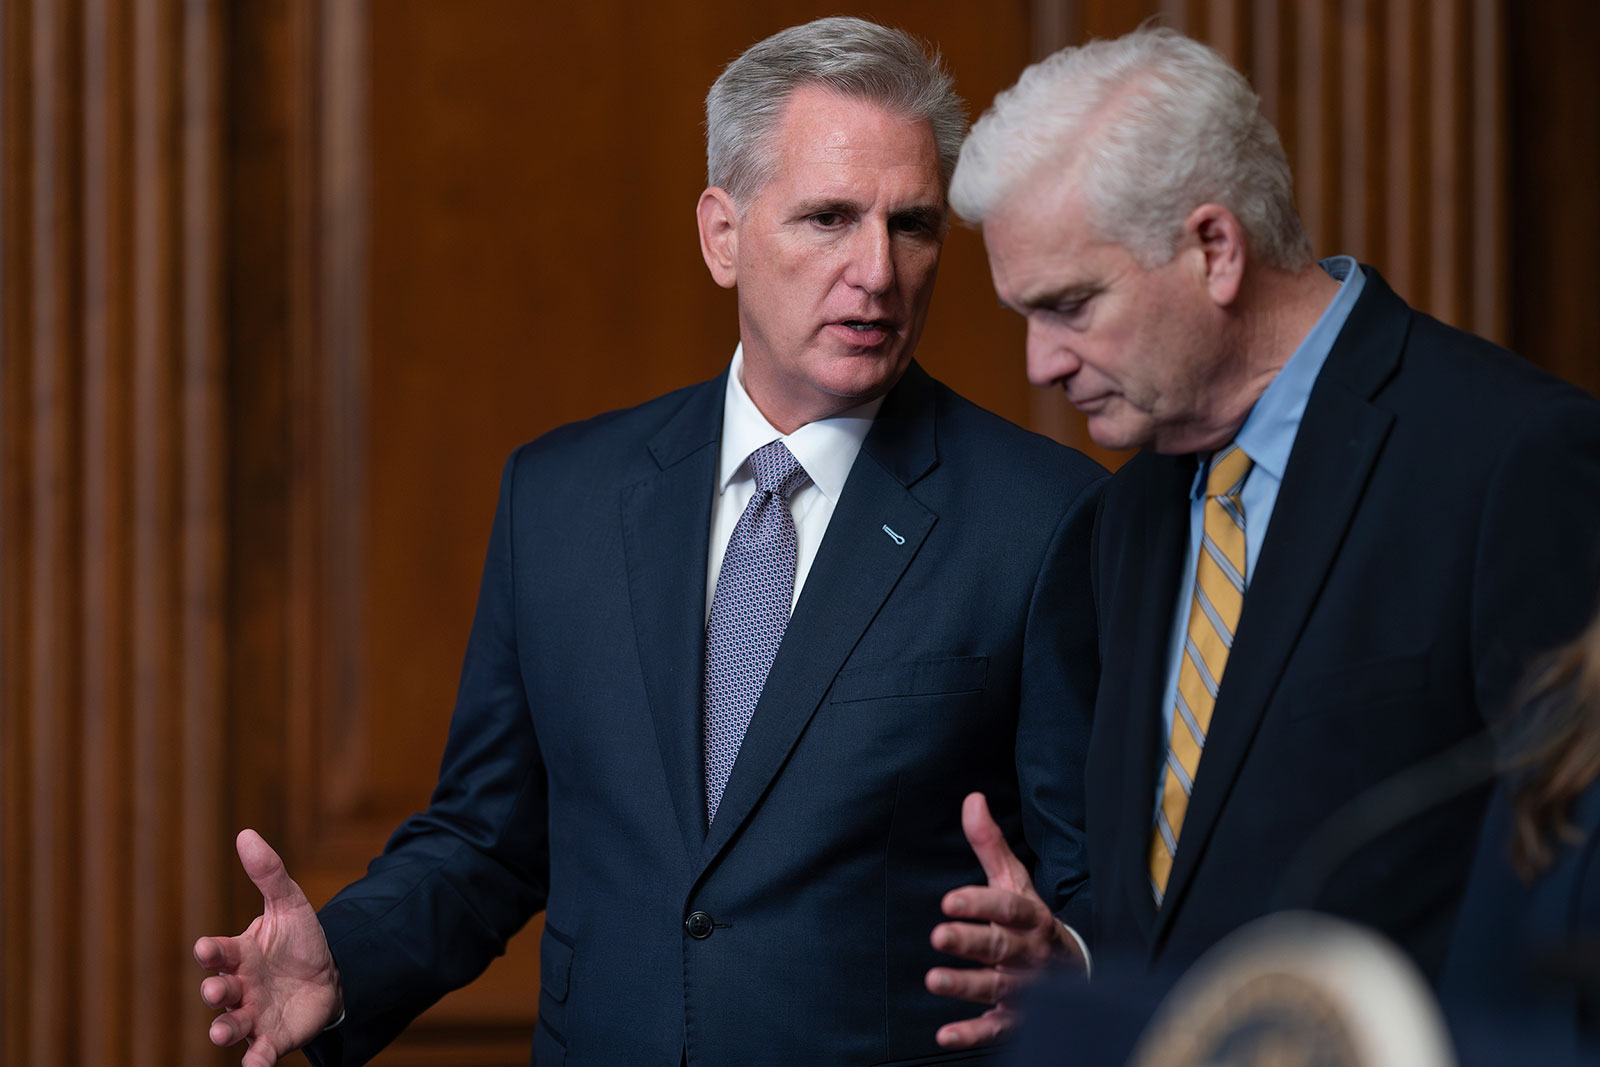 McCarthy talks with Emmer at the US Capitol on September 30.